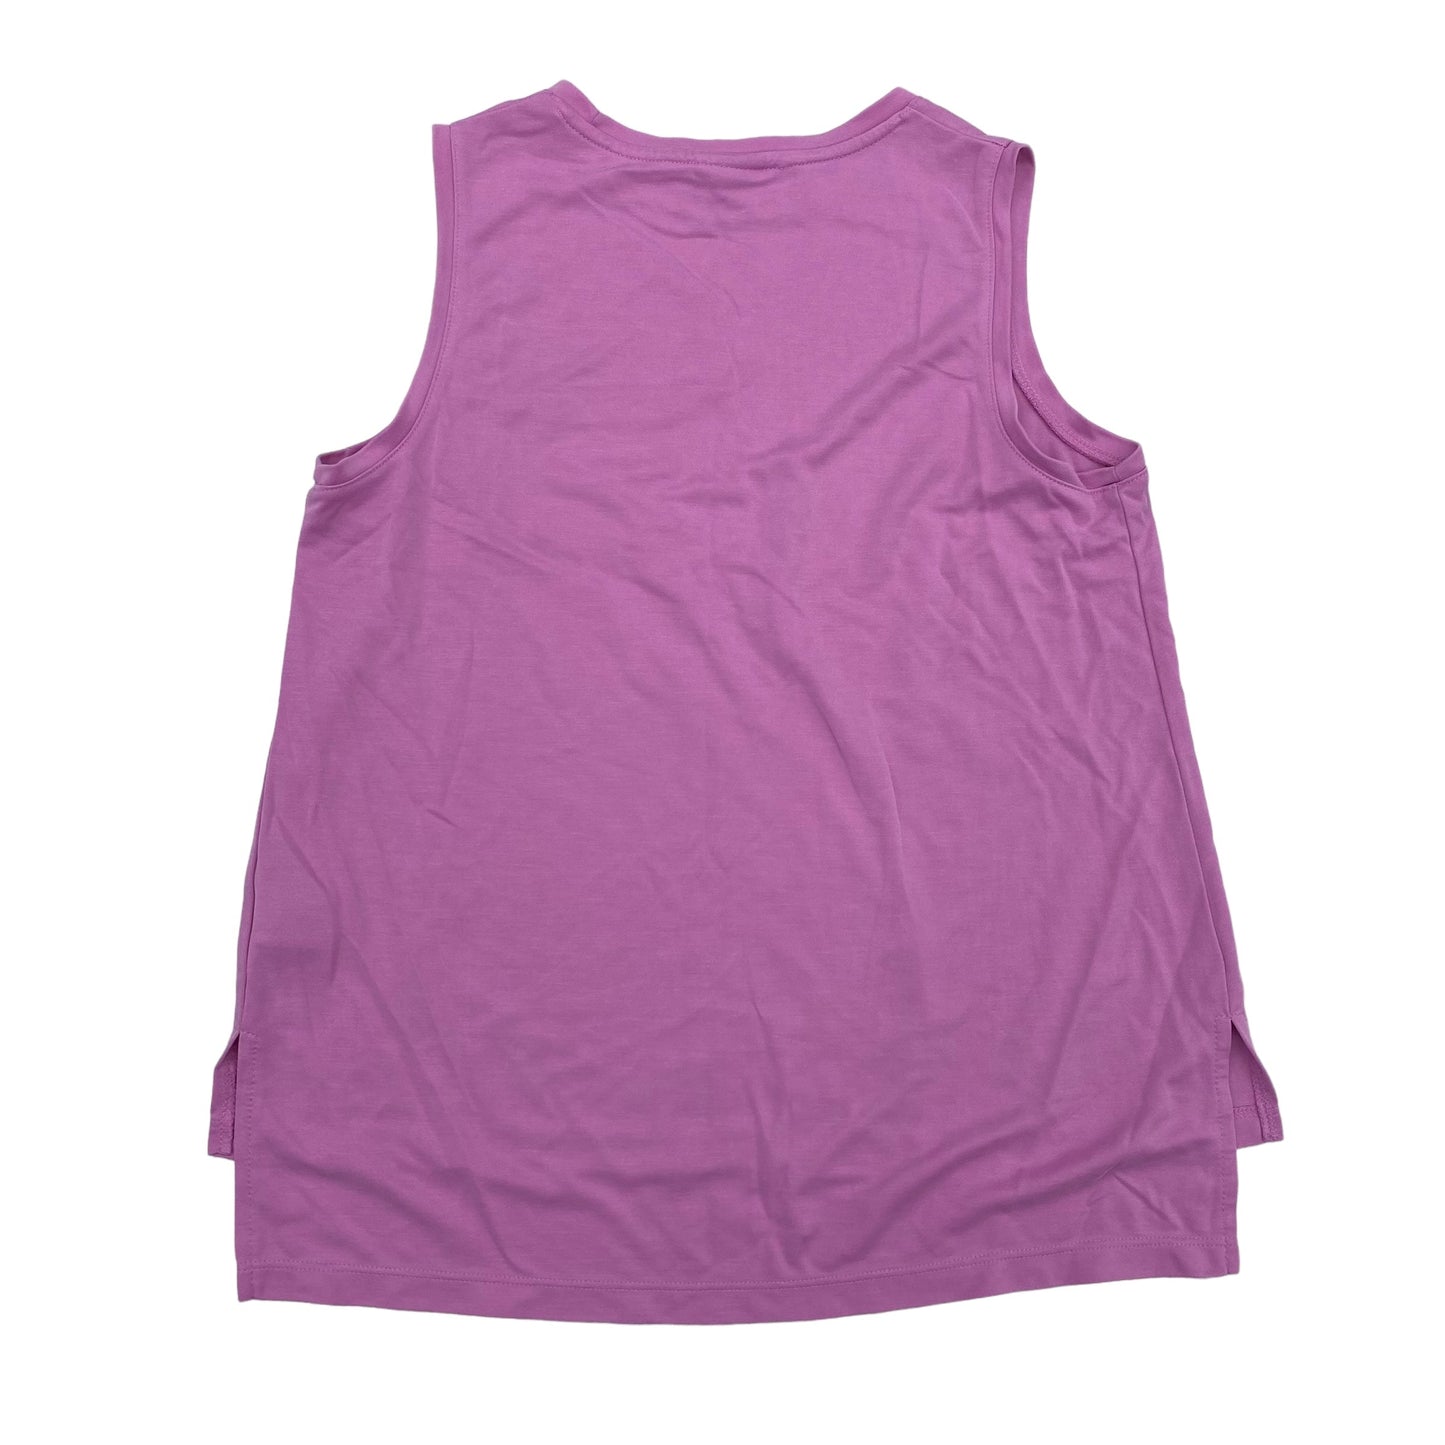 Purple Top Sleeveless A New Day, Size S